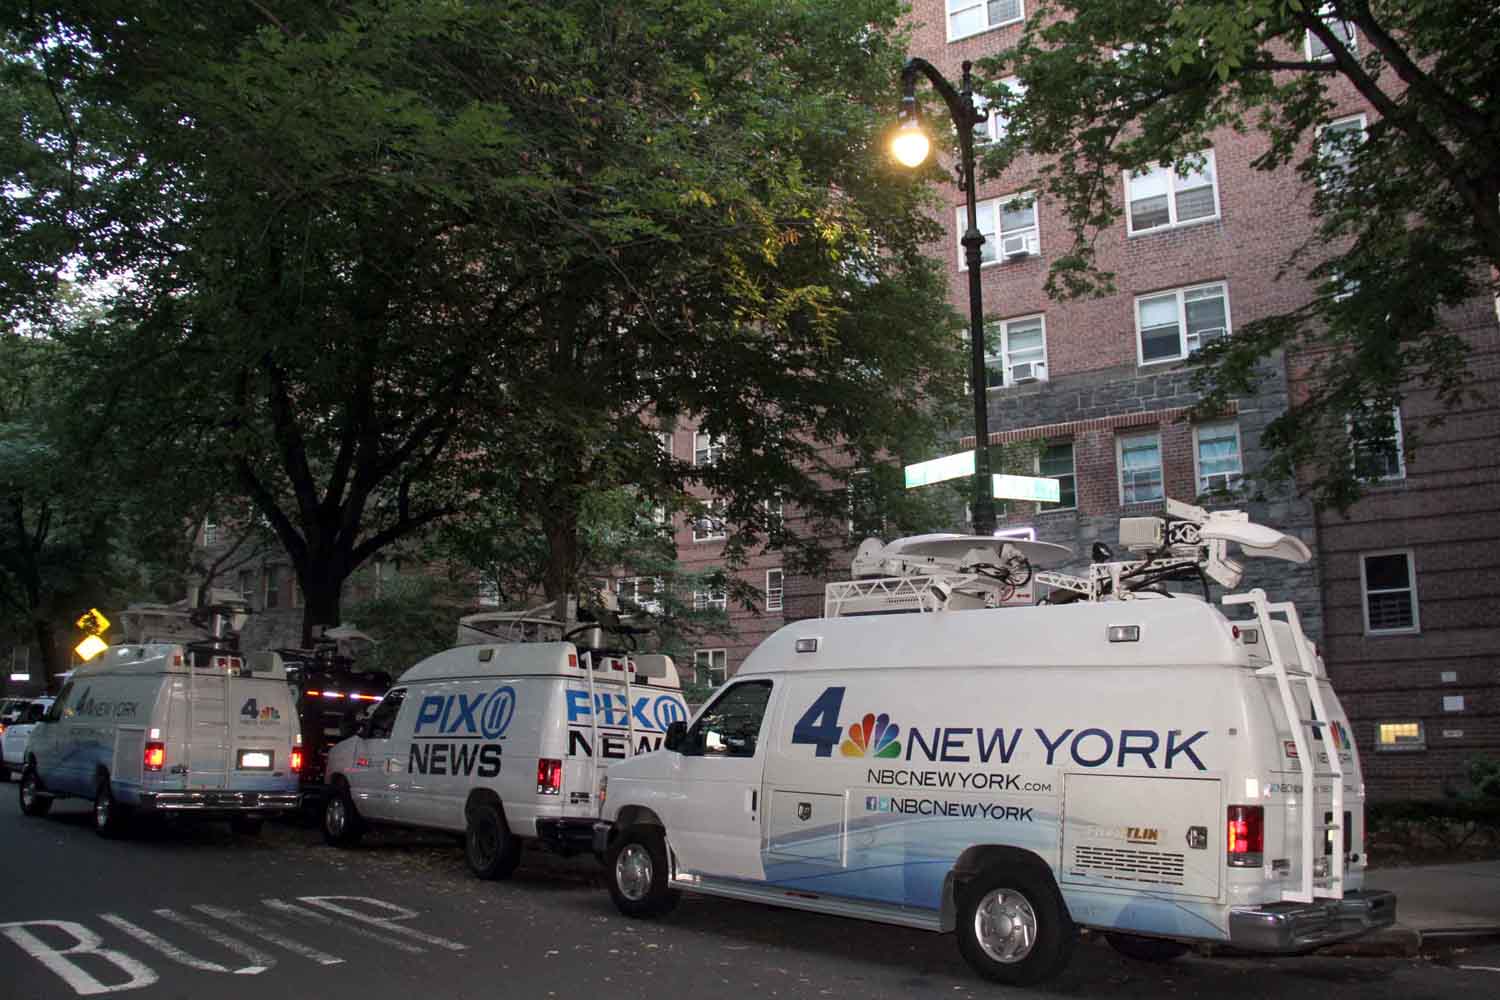 Members of several local television news networks were camped outside of the Amalgamated Houses where police say two young children were murdered.--Photo by David Greene